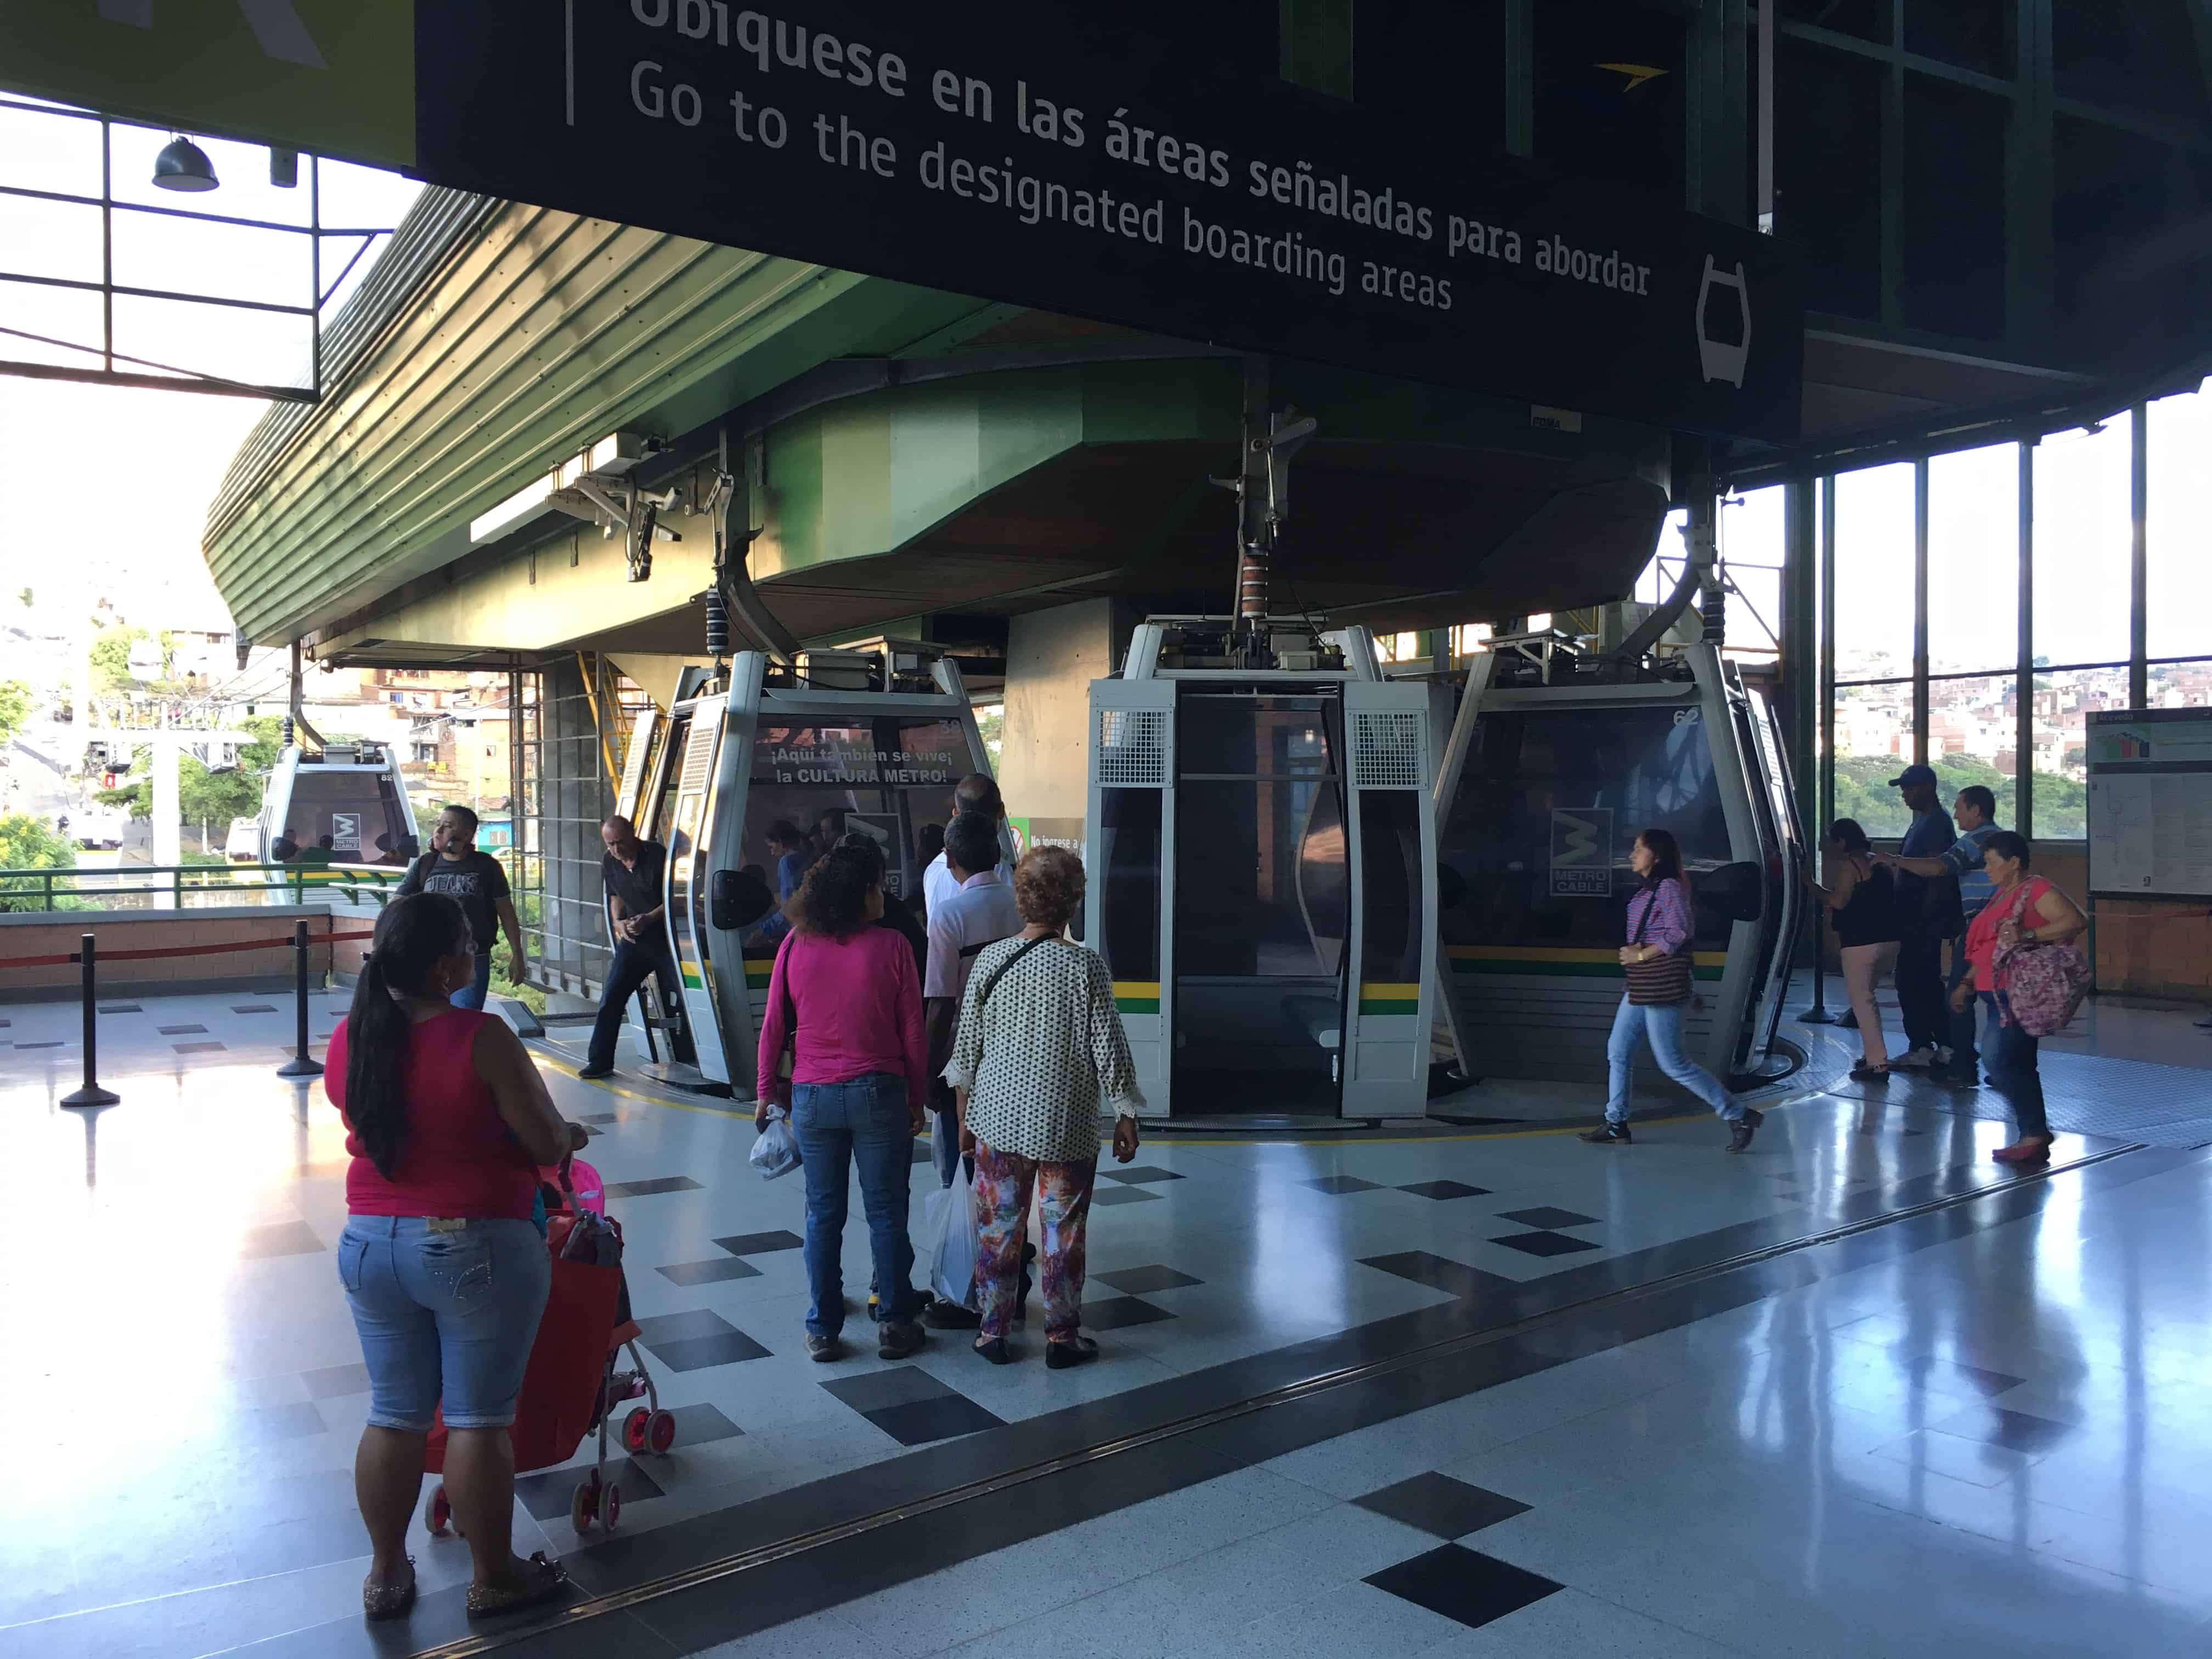 Boarding the cable car at Metrocable Line K in Medellín, Antioquia, Colombia